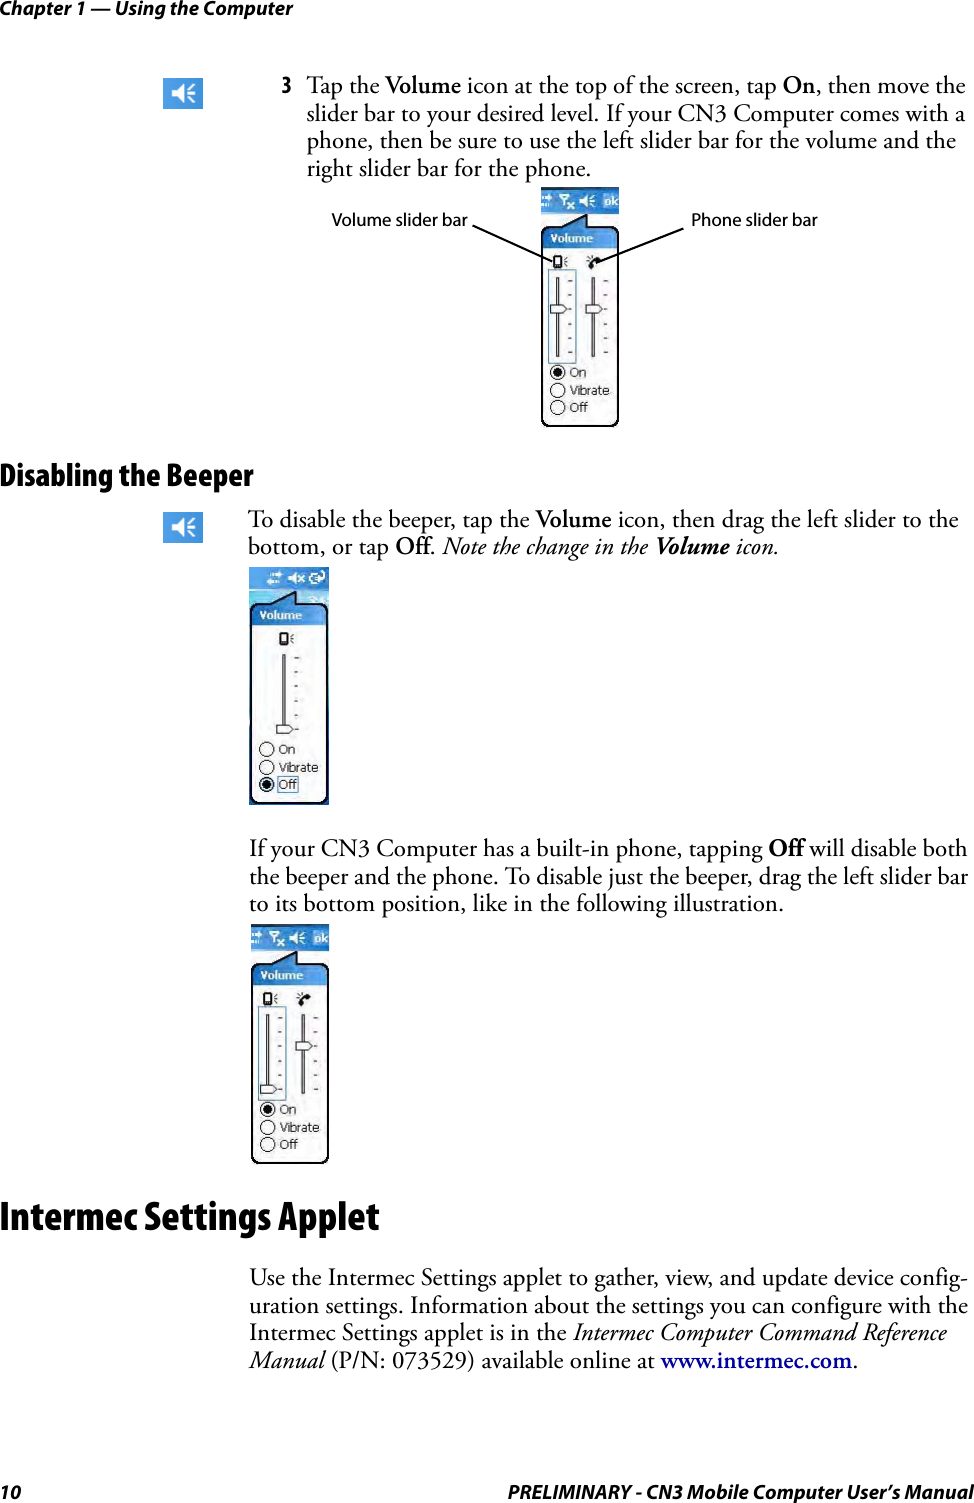 Chapter 1 — Using the Computer10 PRELIMINARY - CN3 Mobile Computer User’s ManualDisabling the BeeperIf your CN3 Computer has a built-in phone, tapping Off will disable both the beeper and the phone. To disable just the beeper, drag the left slider bar to its bottom position, like in the following illustration.Intermec Settings AppletUse the Intermec Settings applet to gather, view, and update device config-uration settings. Information about the settings you can configure with the Intermec Settings applet is in the Intermec Computer Command Reference Manual (P/N: 073529) available online at www.intermec.com.3Tap the Volume icon at the top of the screen, tap On, then move the slider bar to your desired level. If your CN3 Computer comes with a phone, then be sure to use the left slider bar for the volume and the right slider bar for the phone.To disable the beeper, tap the Volume icon, then drag the left slider to the bottom, or tap Off. Note the change in the Vo l u m e  icon.Phone slider barVolume slider bar